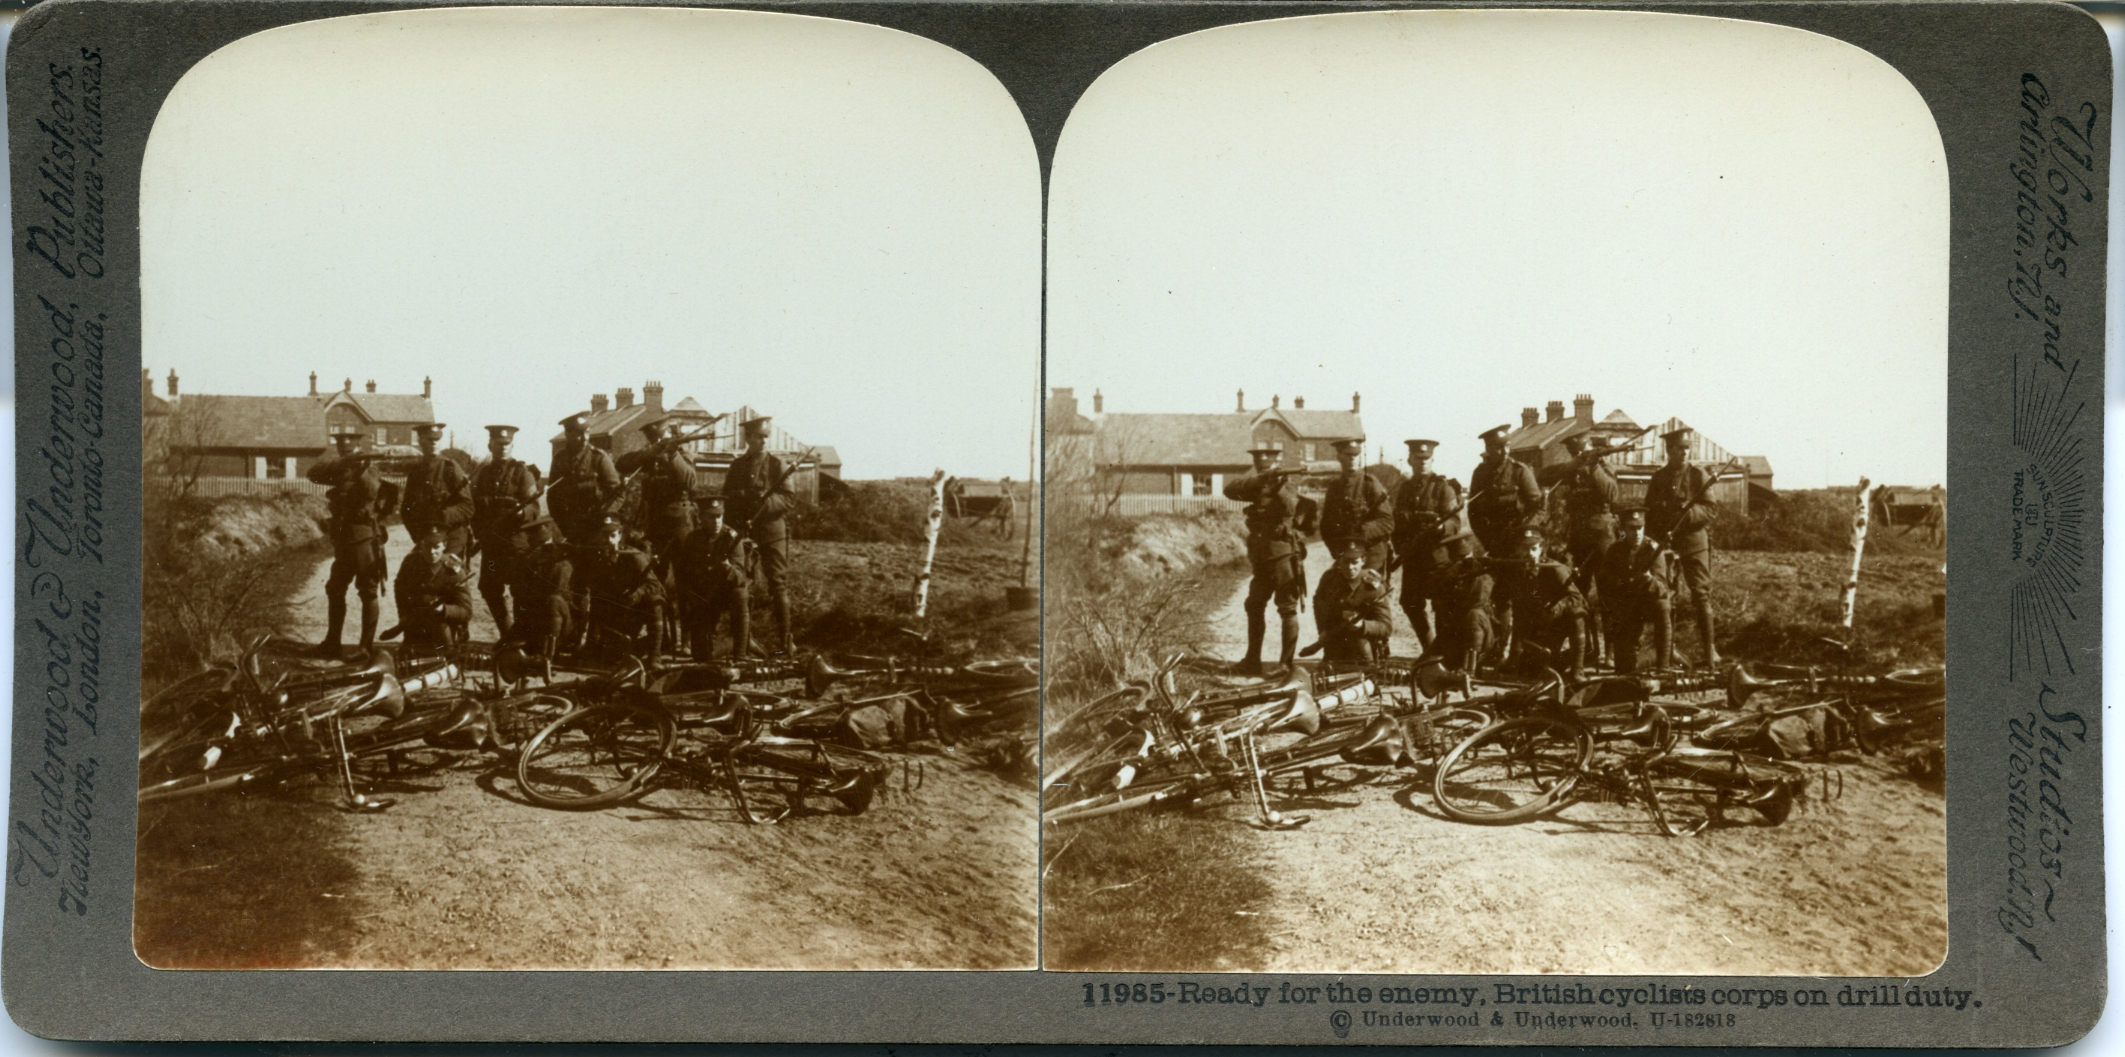 Ready for the enemy, British cyclist corps on drill duty